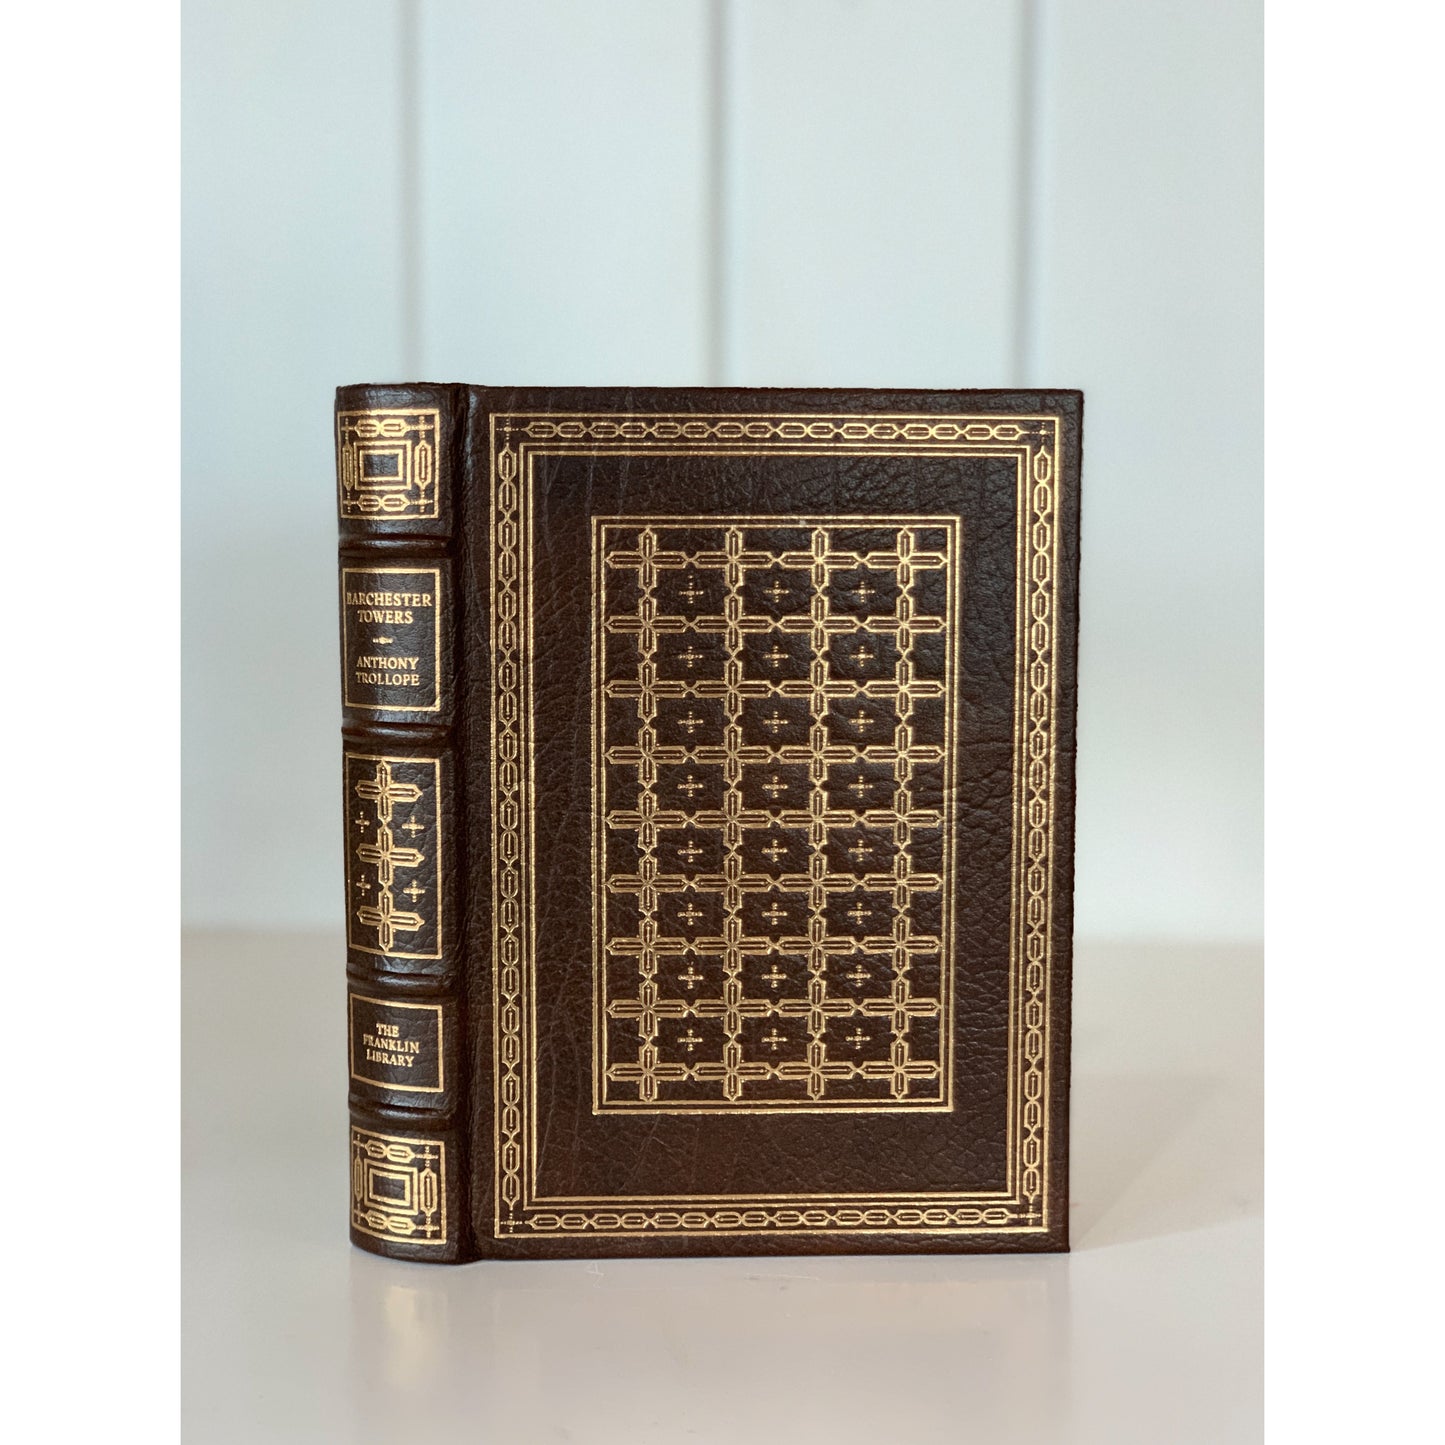 Barchester Towers, Anthony Trollope, Franklin Library, Ornate Leather Book, Limited Edition 1983